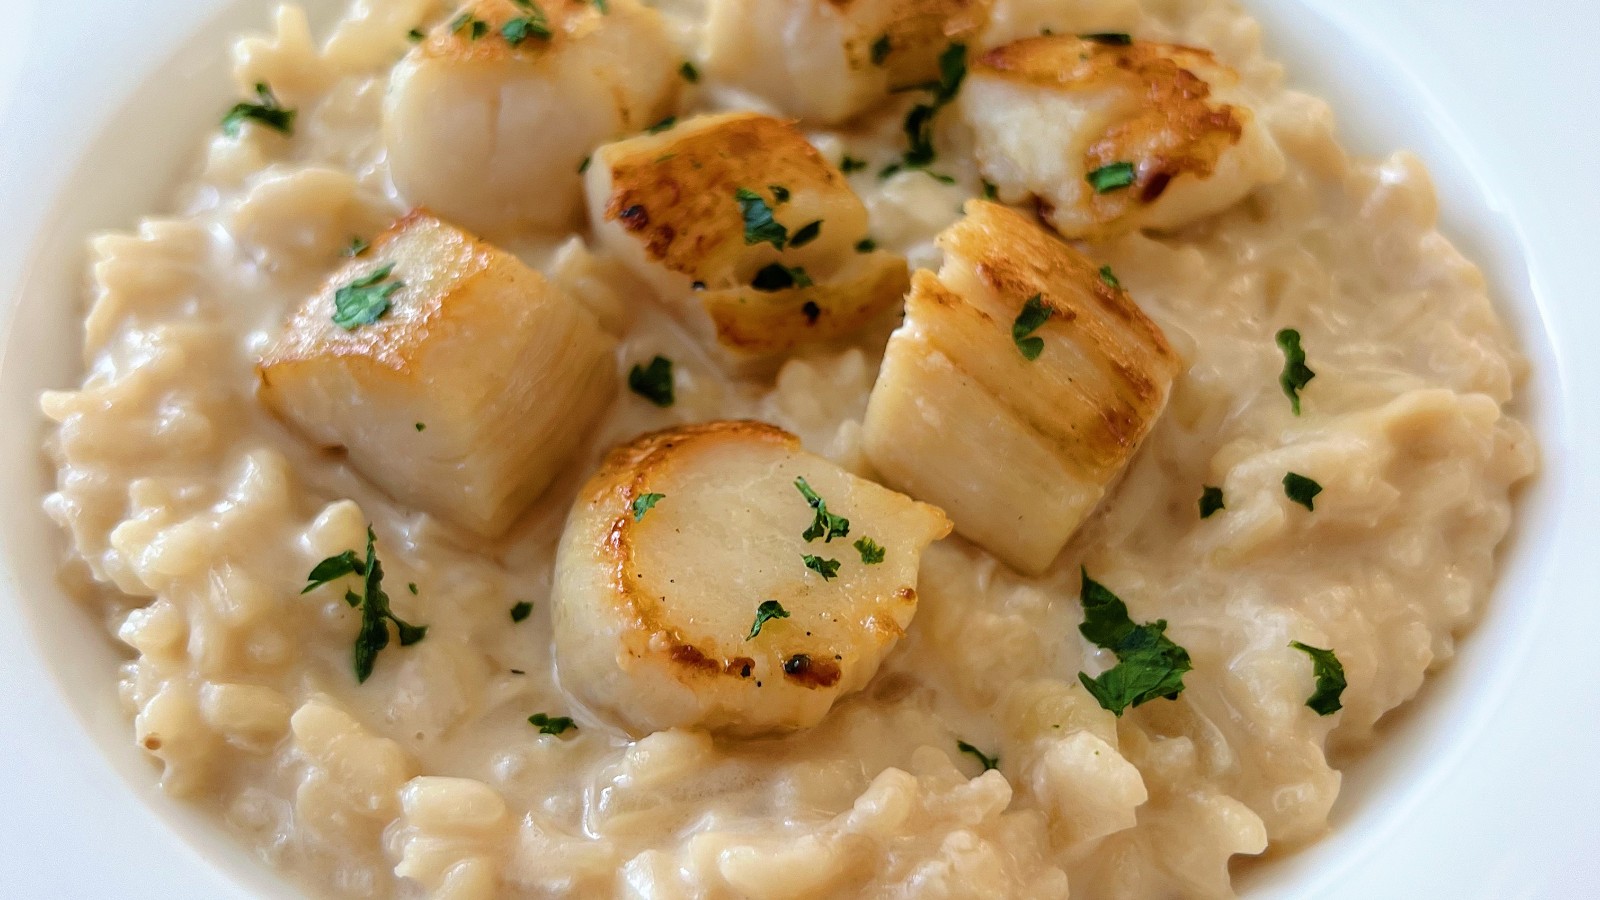 Image of Seared Scallops over Lemon Parmesan Risotto